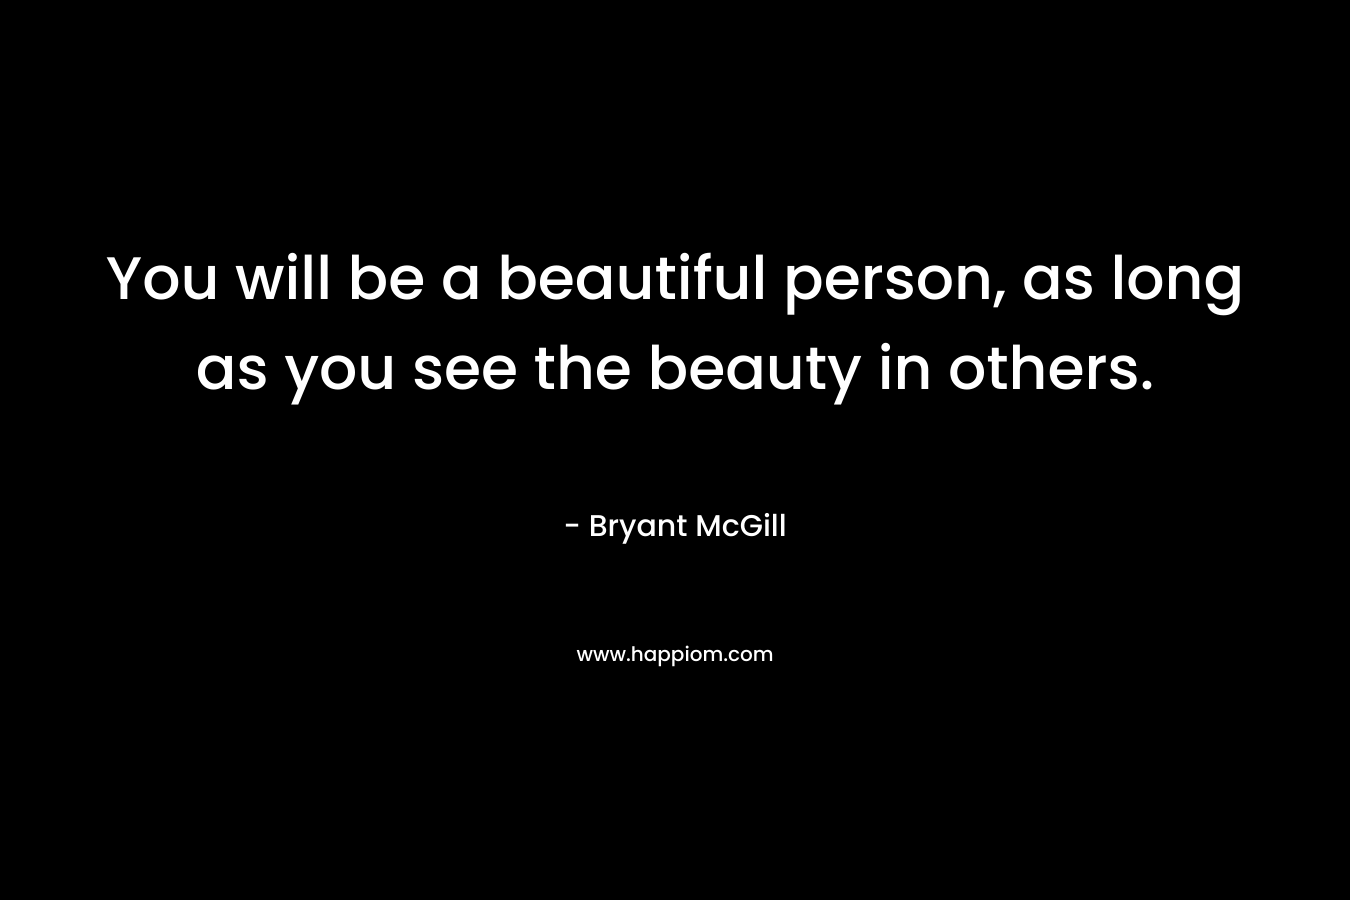 You will be a beautiful person, as long as you see the beauty in others.